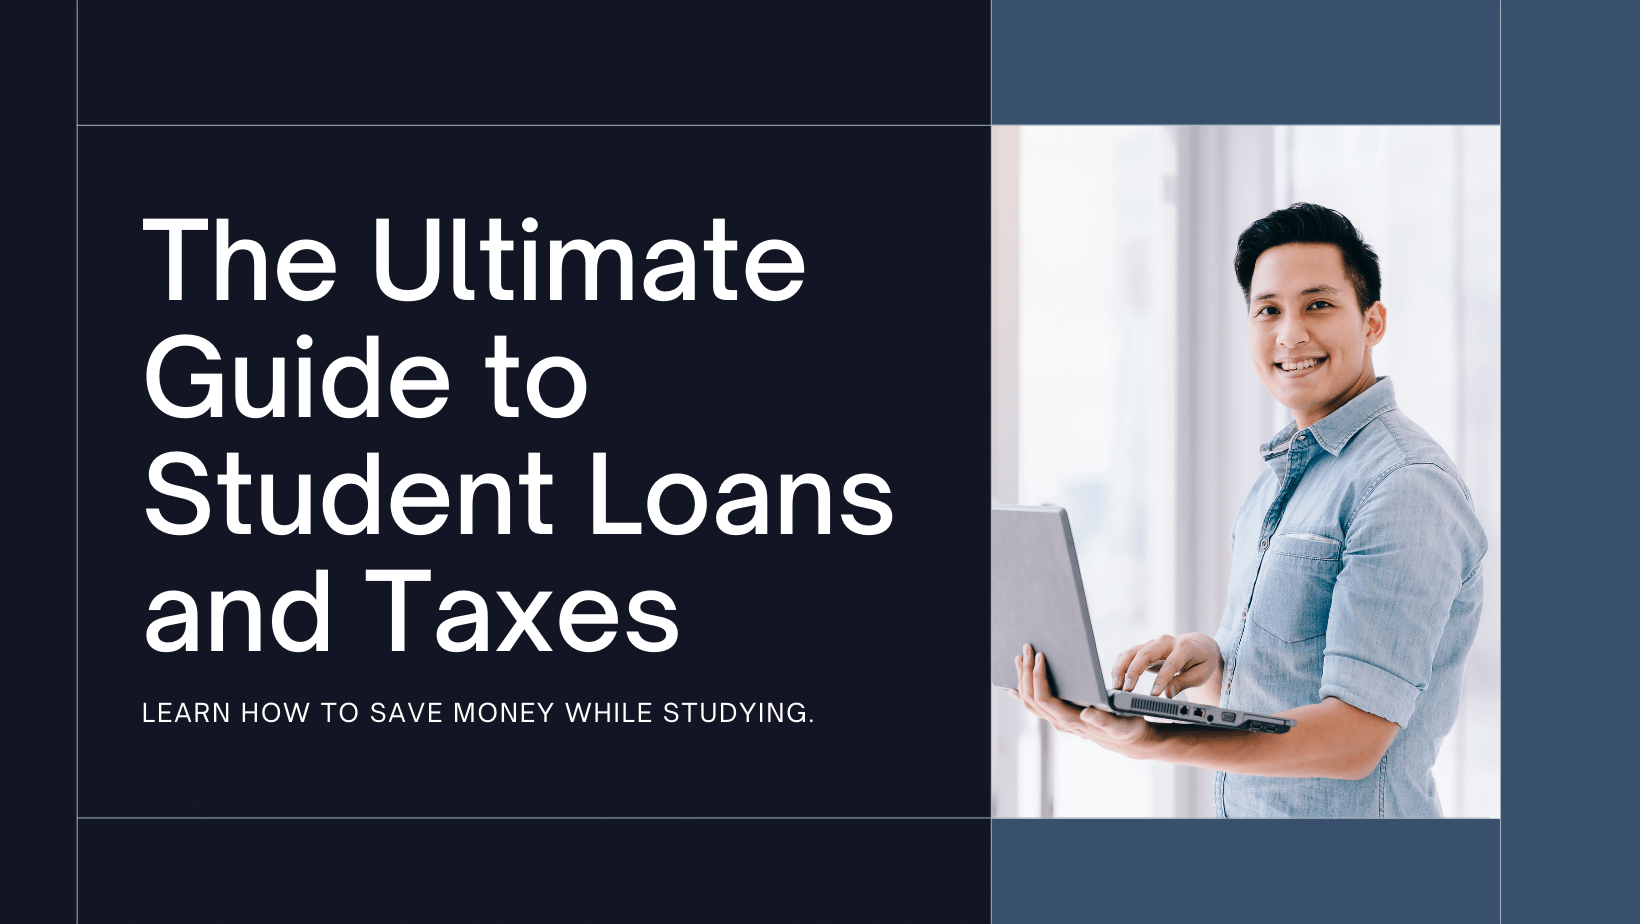 The Ultimate Guide to Student Loans and